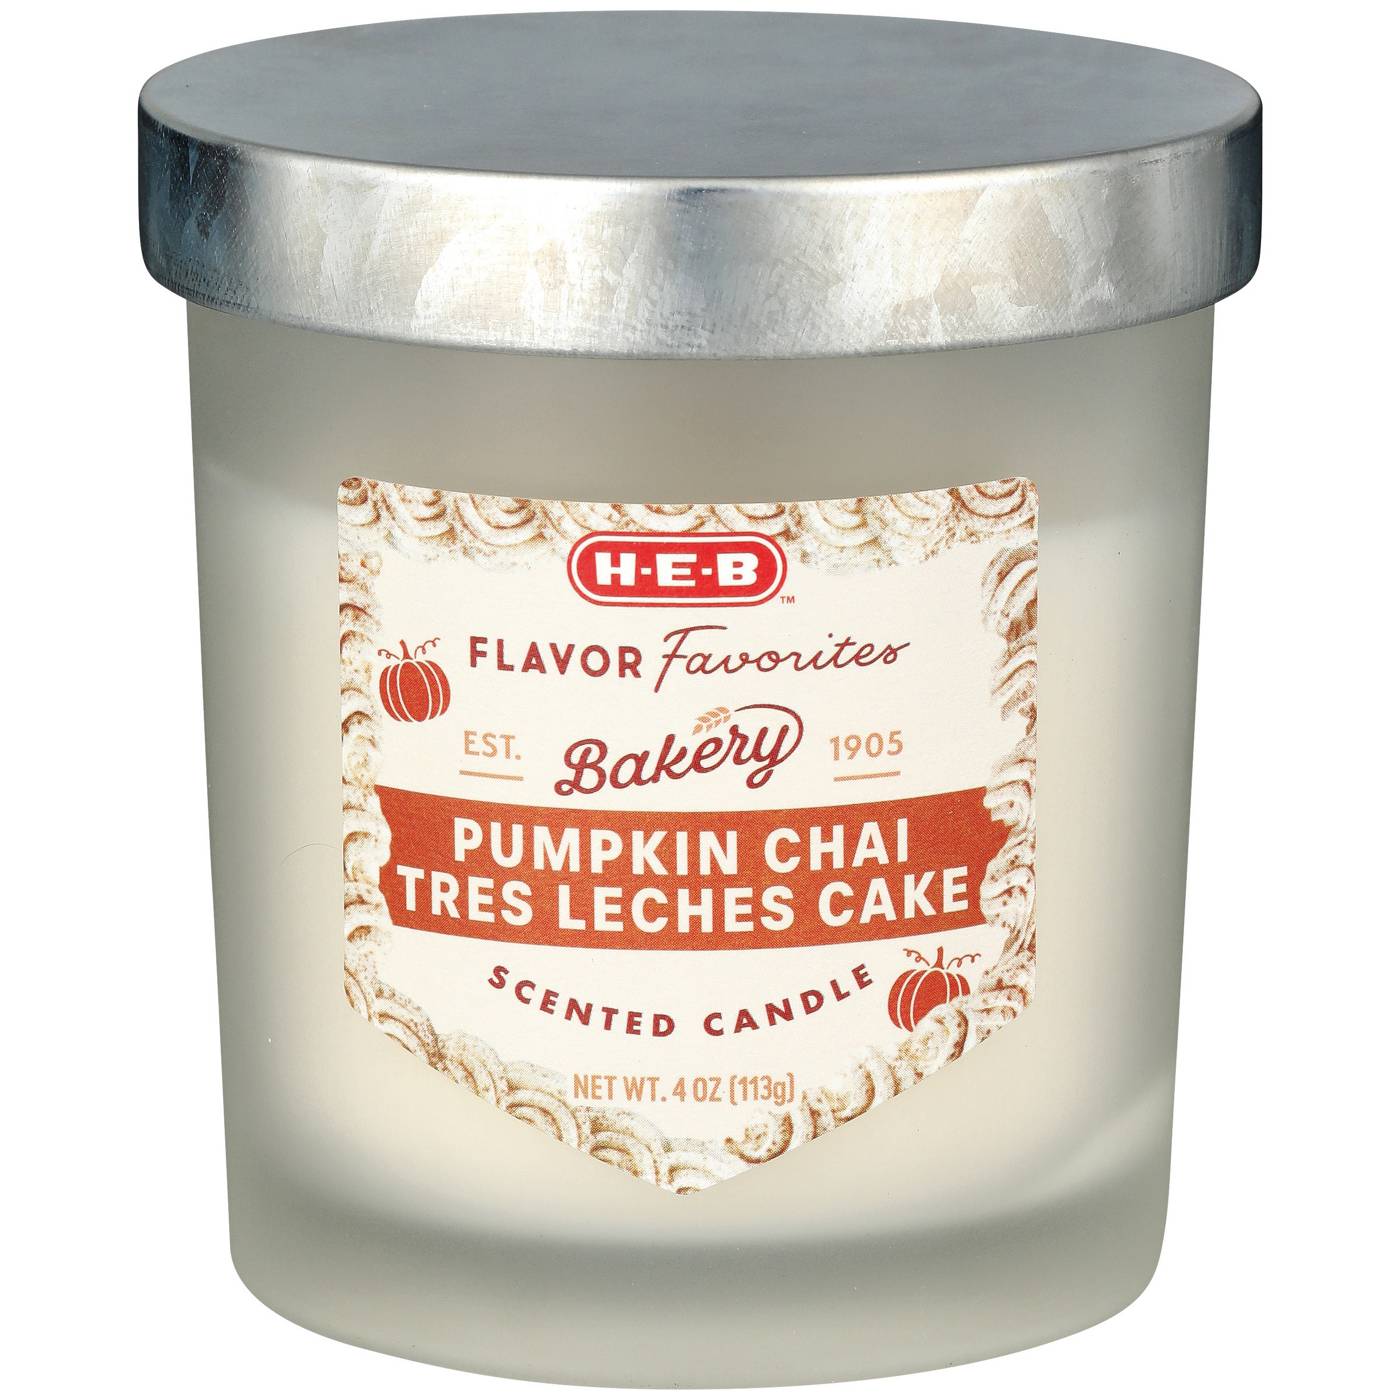 H-E-B Flavor Favorites Pumpkin Chai Tres Leches Cake Scented Candle; image 2 of 2